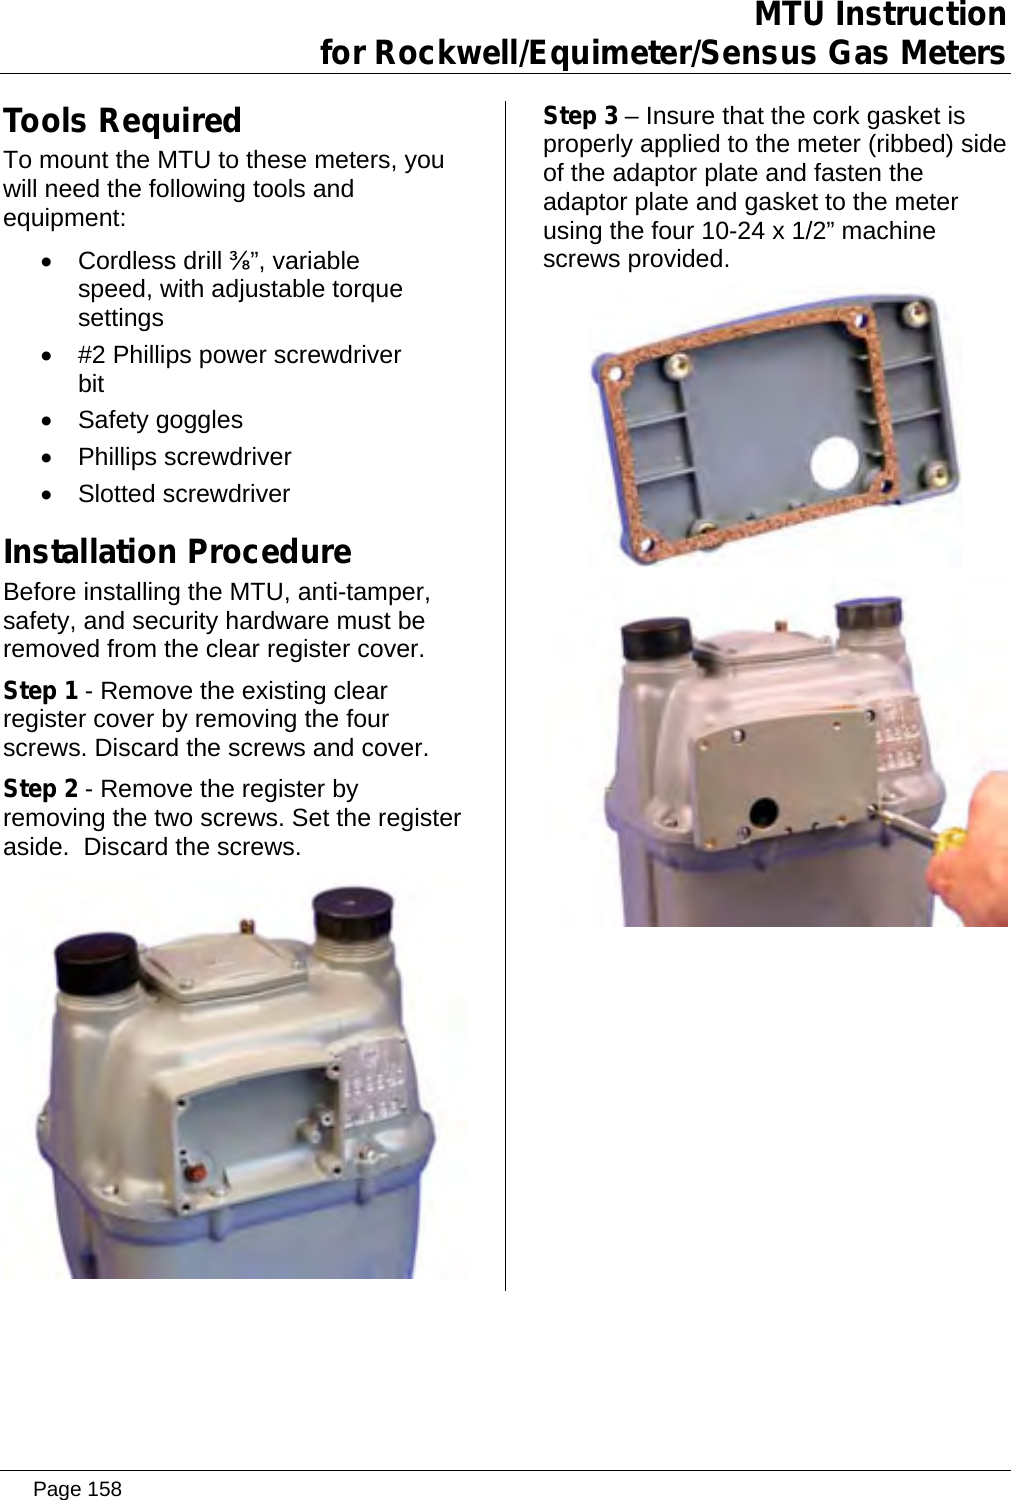 Page 158 of Aclara Technologies 09015 Transmitter for Meter Reading User Manual users manual